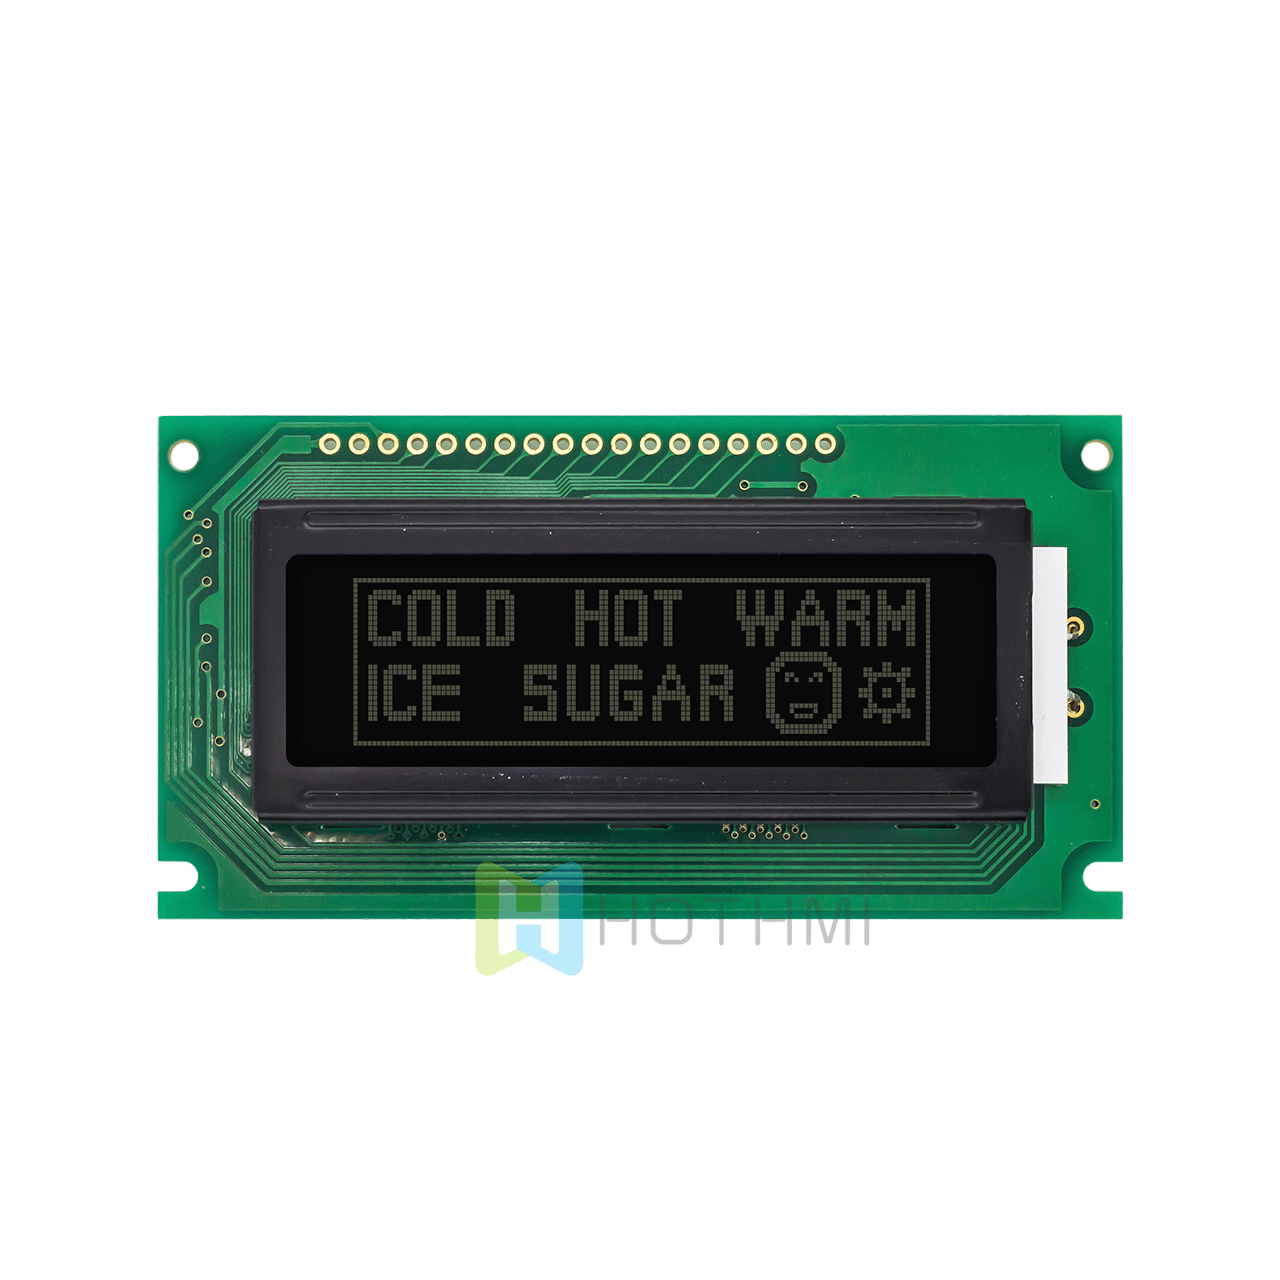 2.5"5.0v | 122X32 monochrome graphic LCD | DFSTN (-) with white side backlight | Adruino | transflective display | white graphics on black | ST7920 controller